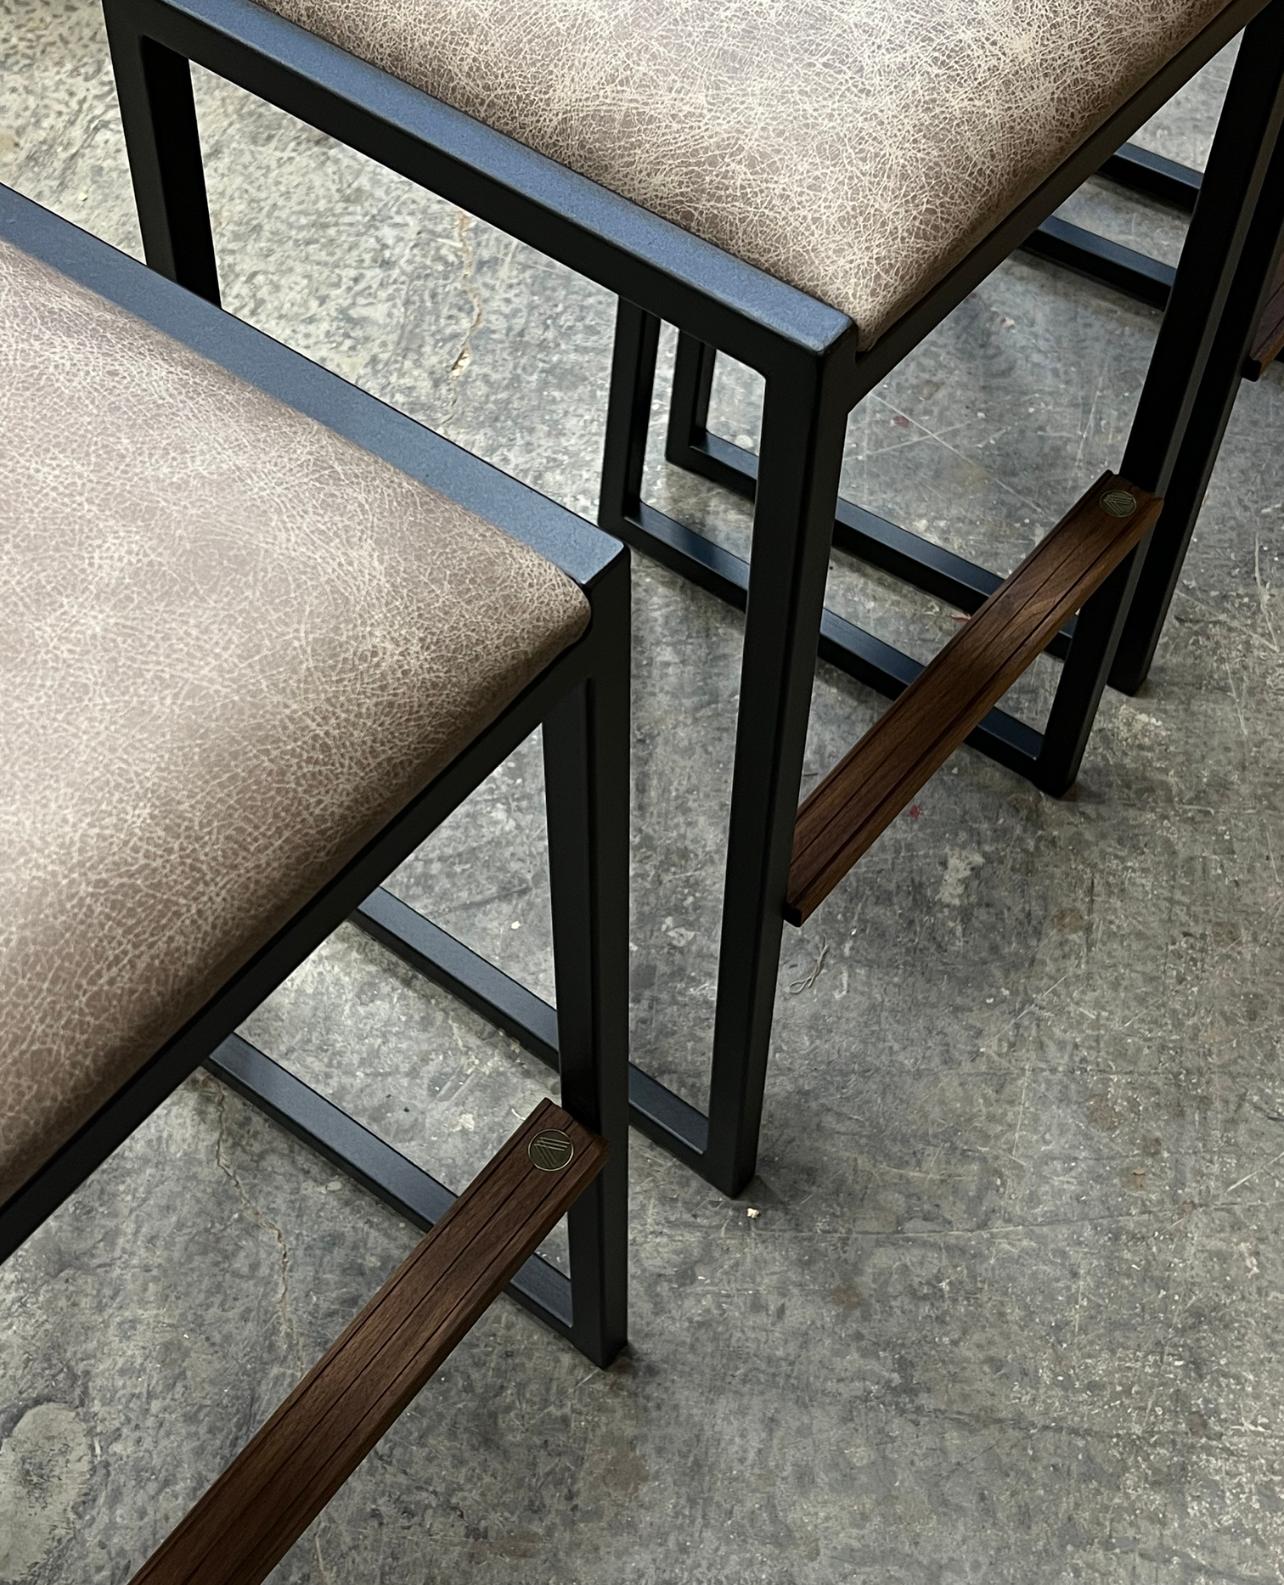 The shaker modern Backless Bar stool chair is handmade to order from our unique Ambrozia black textured steel tubing frame and a Genuine leather seat. Also offered in COM or COL. Inspired by the boarding ladder steps of an old boat. The anti-slip